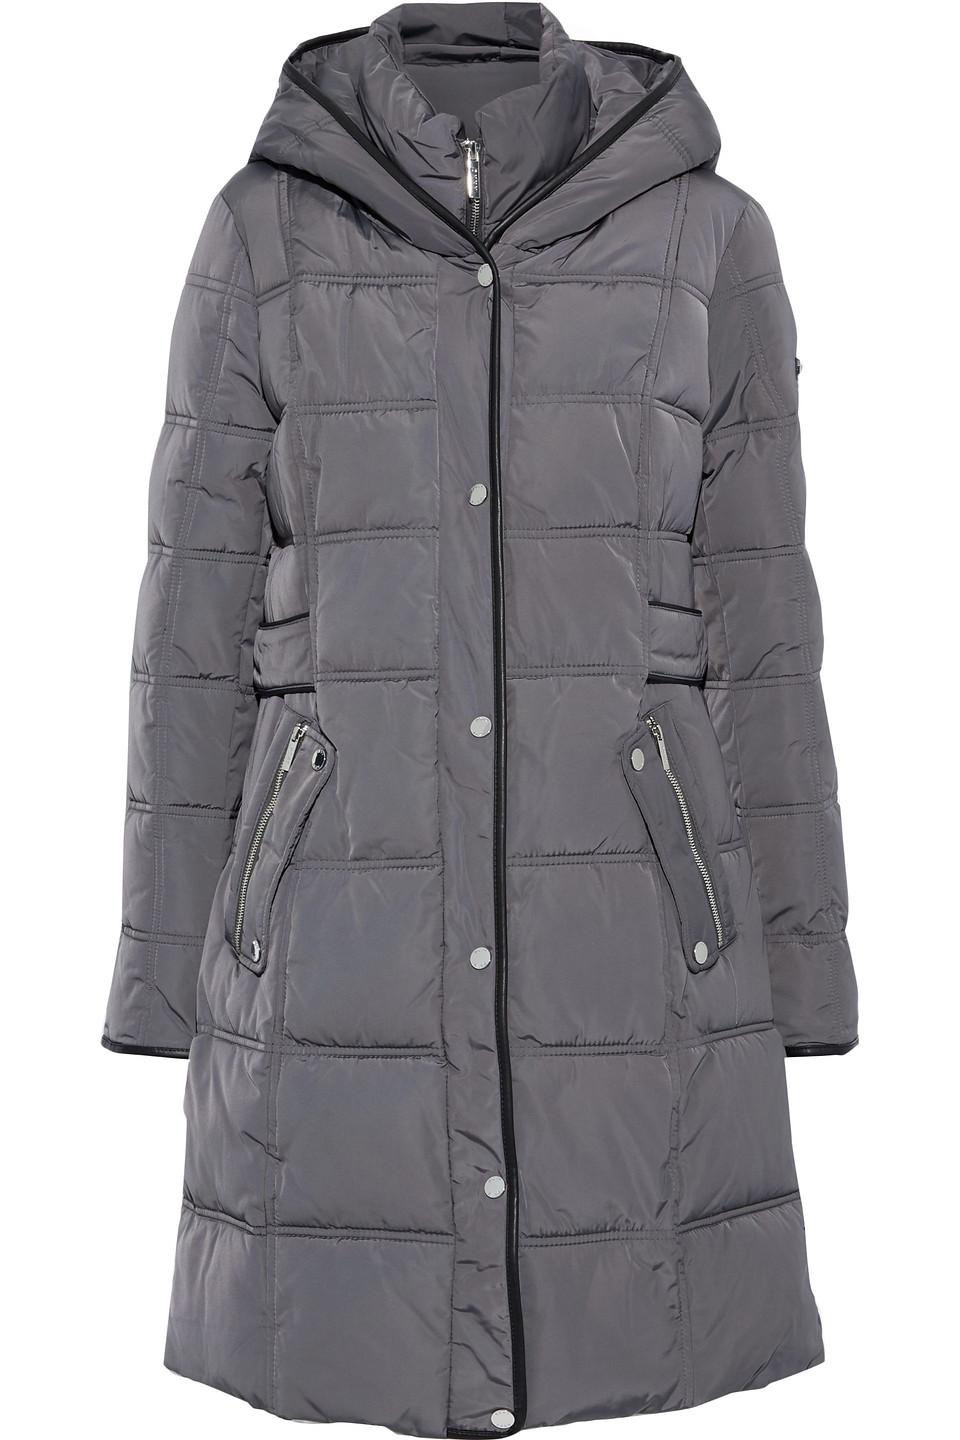 DKNY Synthetic Quilted Shell Hooded Coat Anthracite in Gray - Lyst